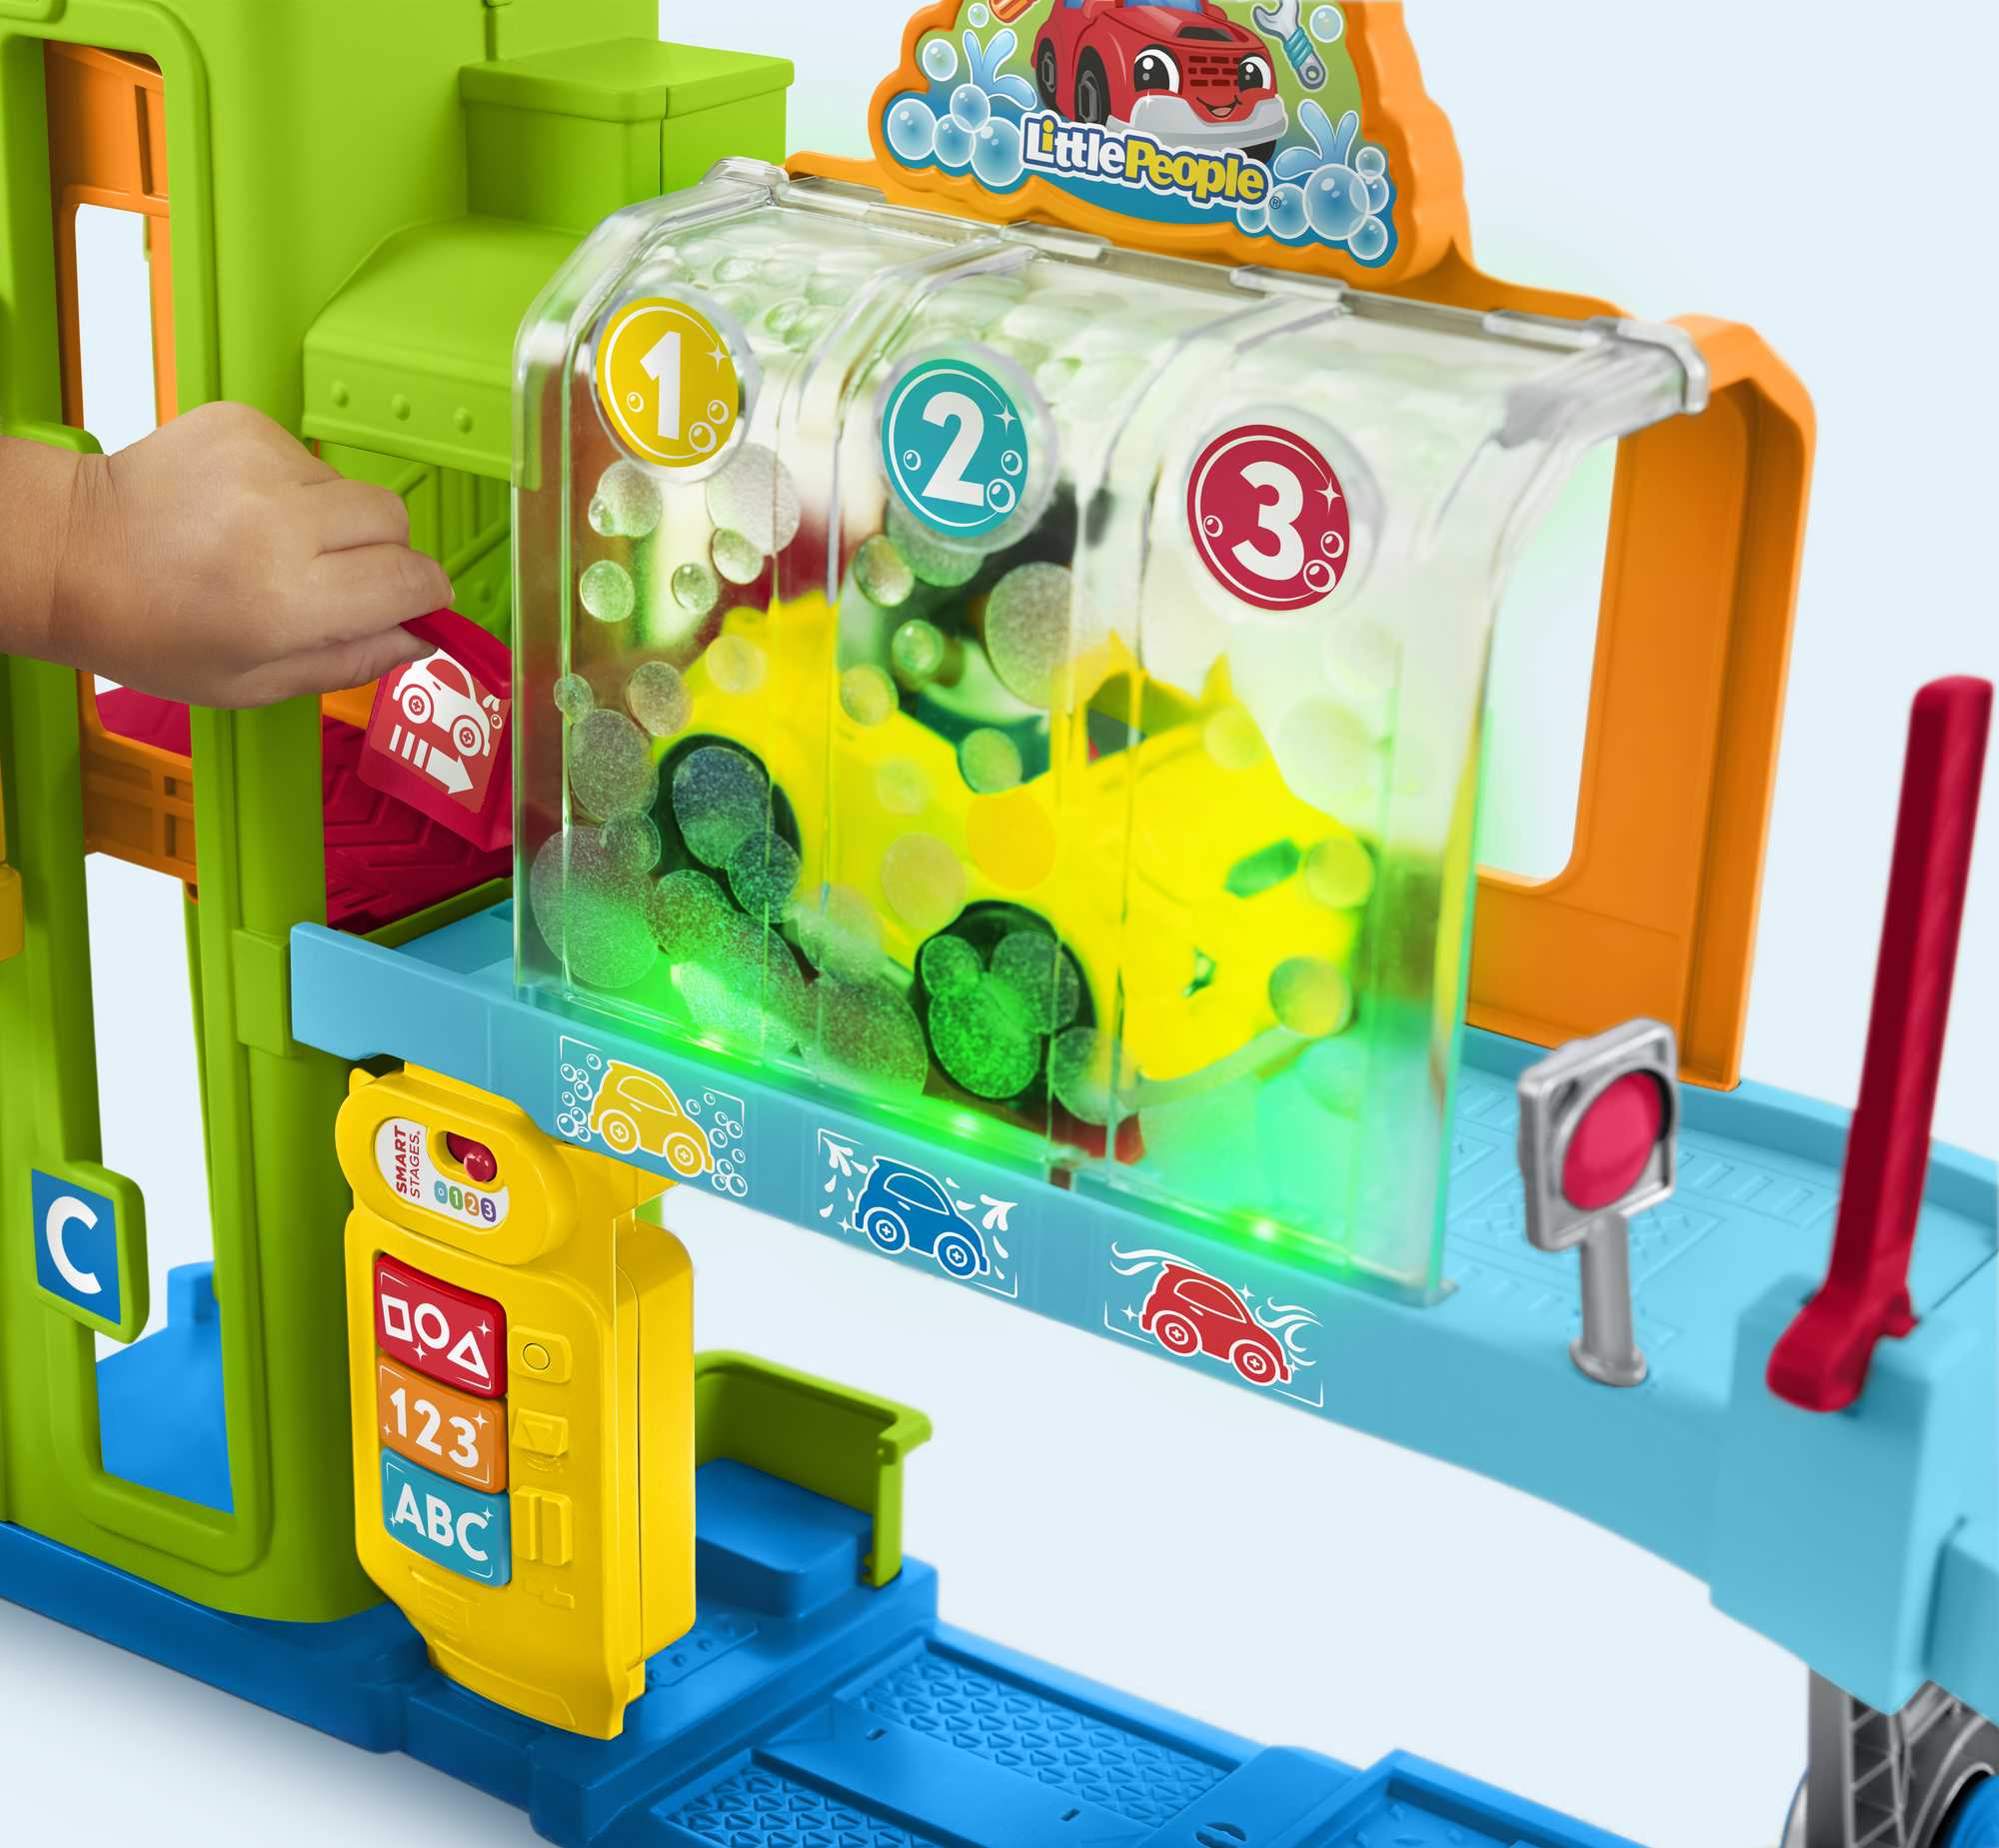 Fisher-Price Little People Toddler Playset with Figures & Toy Car, Light-up  Learning Garage